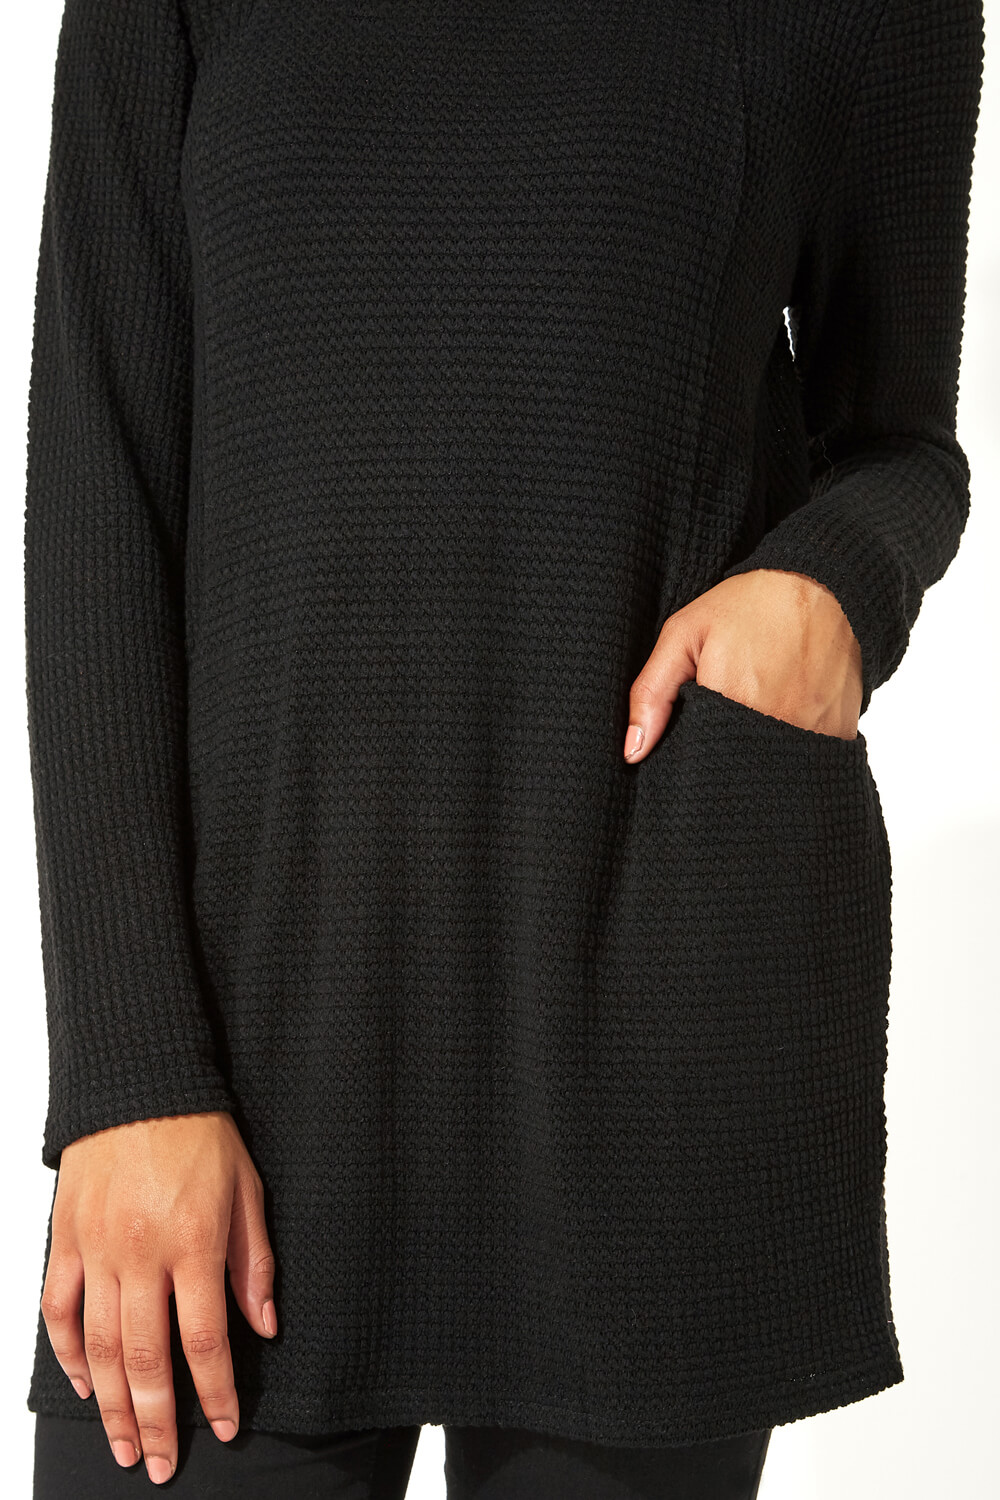 Black Textured Longline Top with Snood, Image 5 of 6